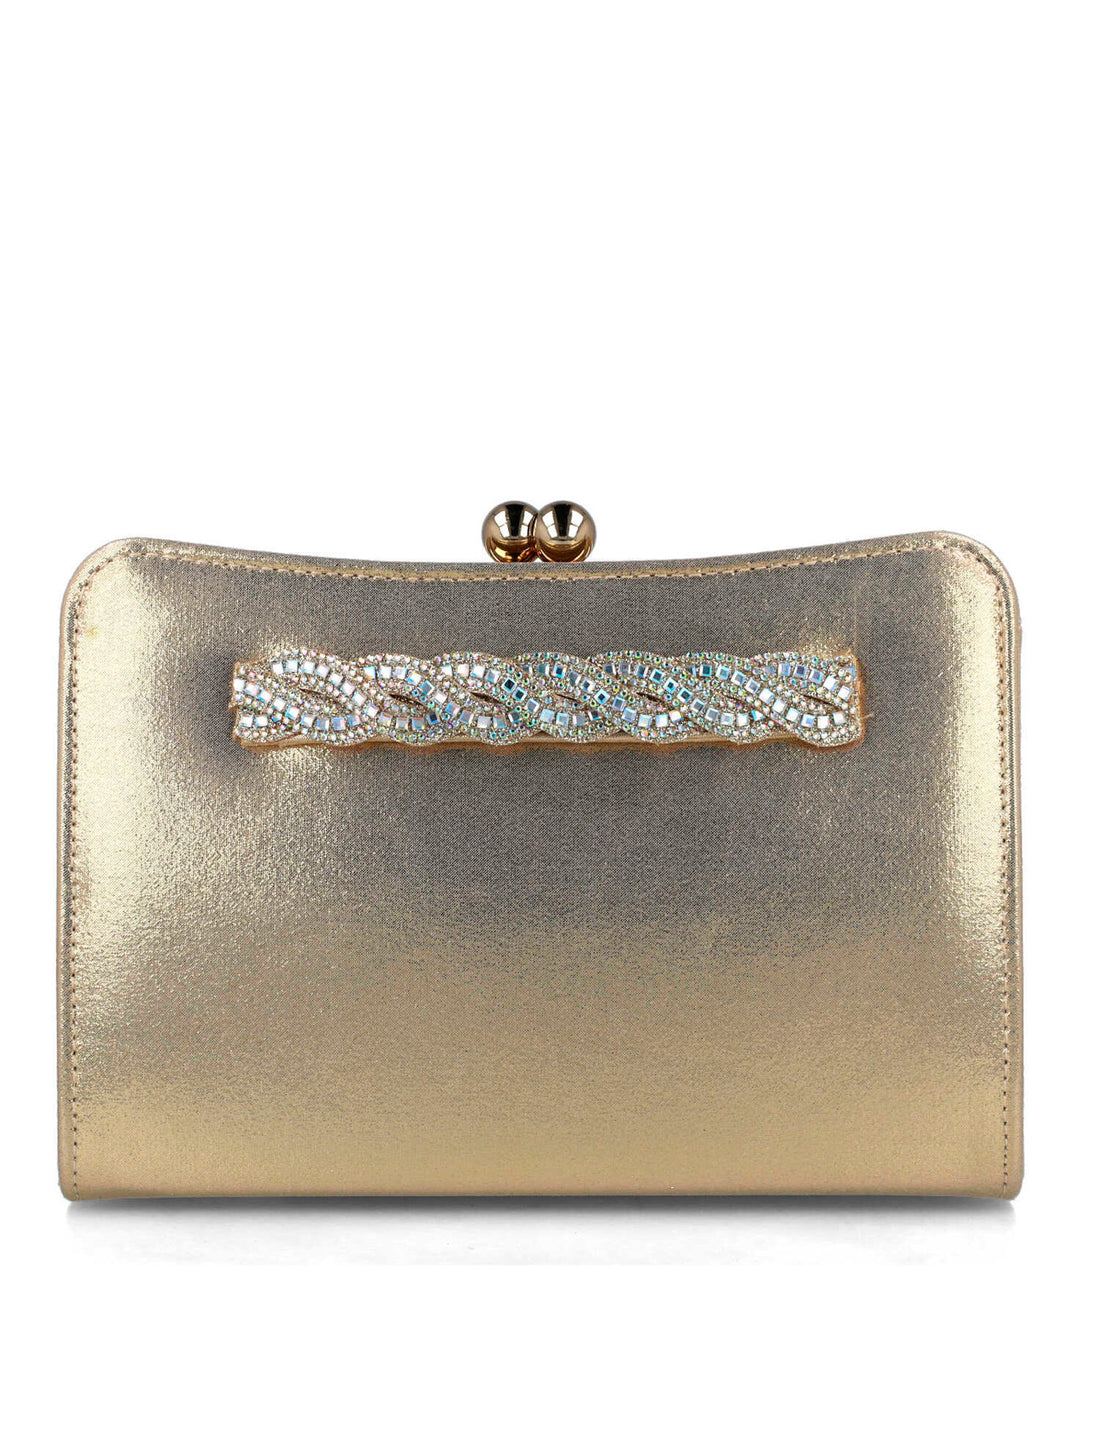 Gold Clutch With Embellished Hand Strap_85490_00_01